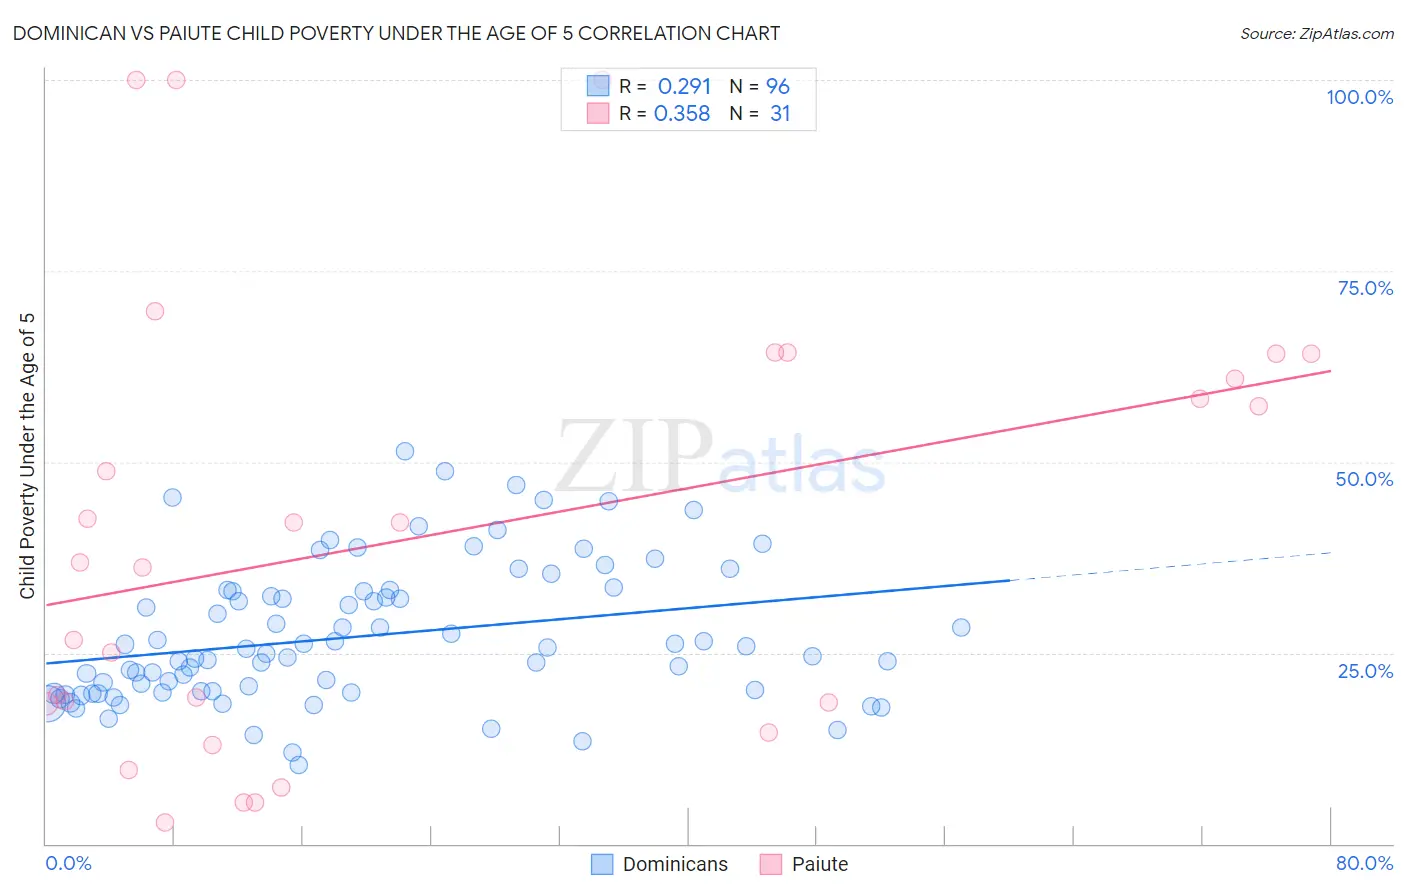 Dominican vs Paiute Child Poverty Under the Age of 5